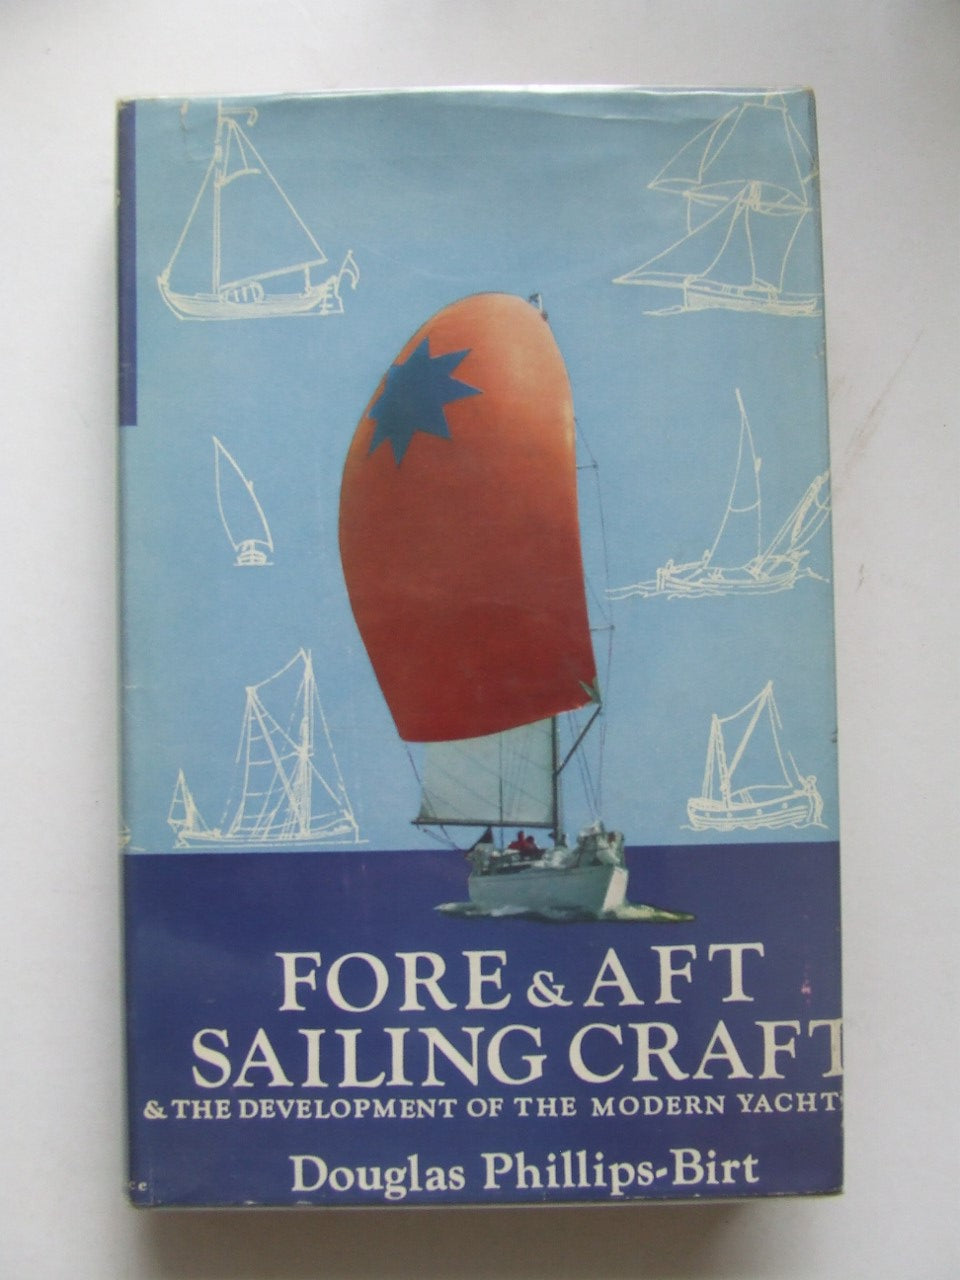 Fore & Aft Sailing Craft, and the development of the modern yacht